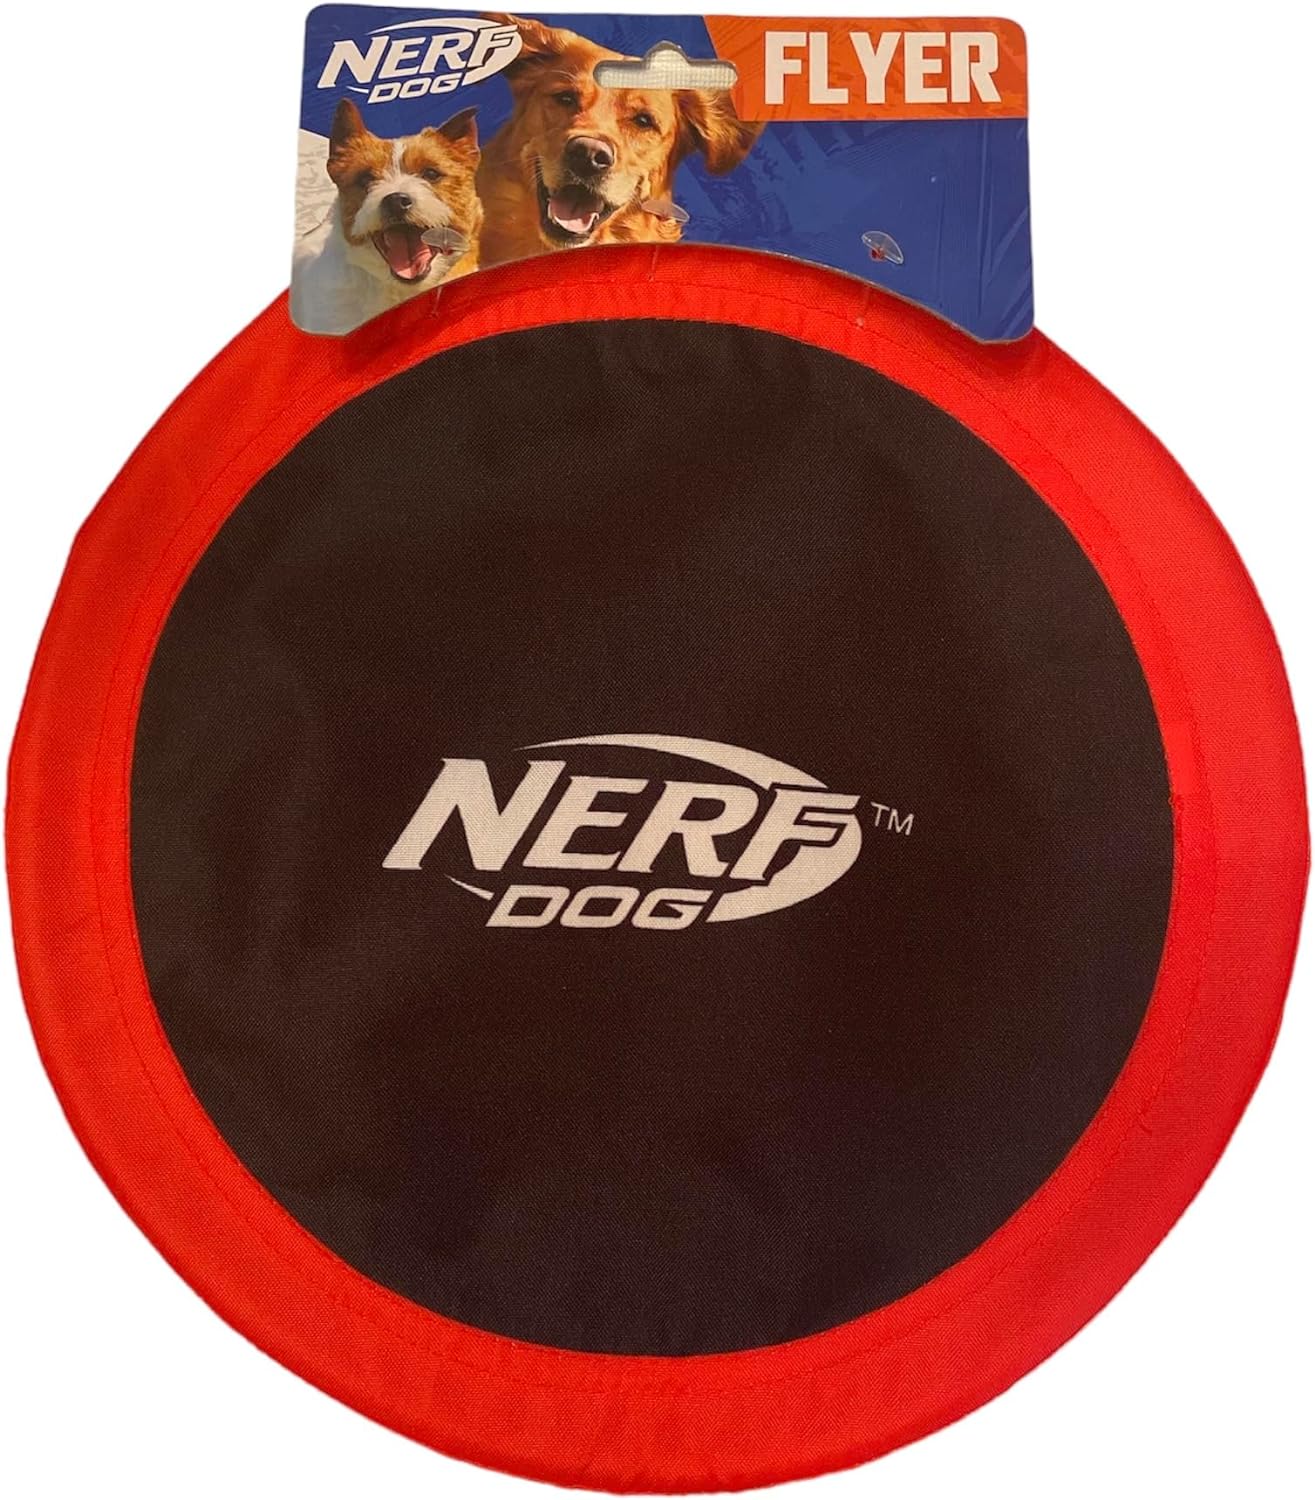 Nerf Dog Nylon Flyer Dog Toy, Flying Disc, Lightweight, Durable and Water Resistant, Great for Beach and Pool, 10 inch Diameter, for Medium/Large Breeds, Red and Black